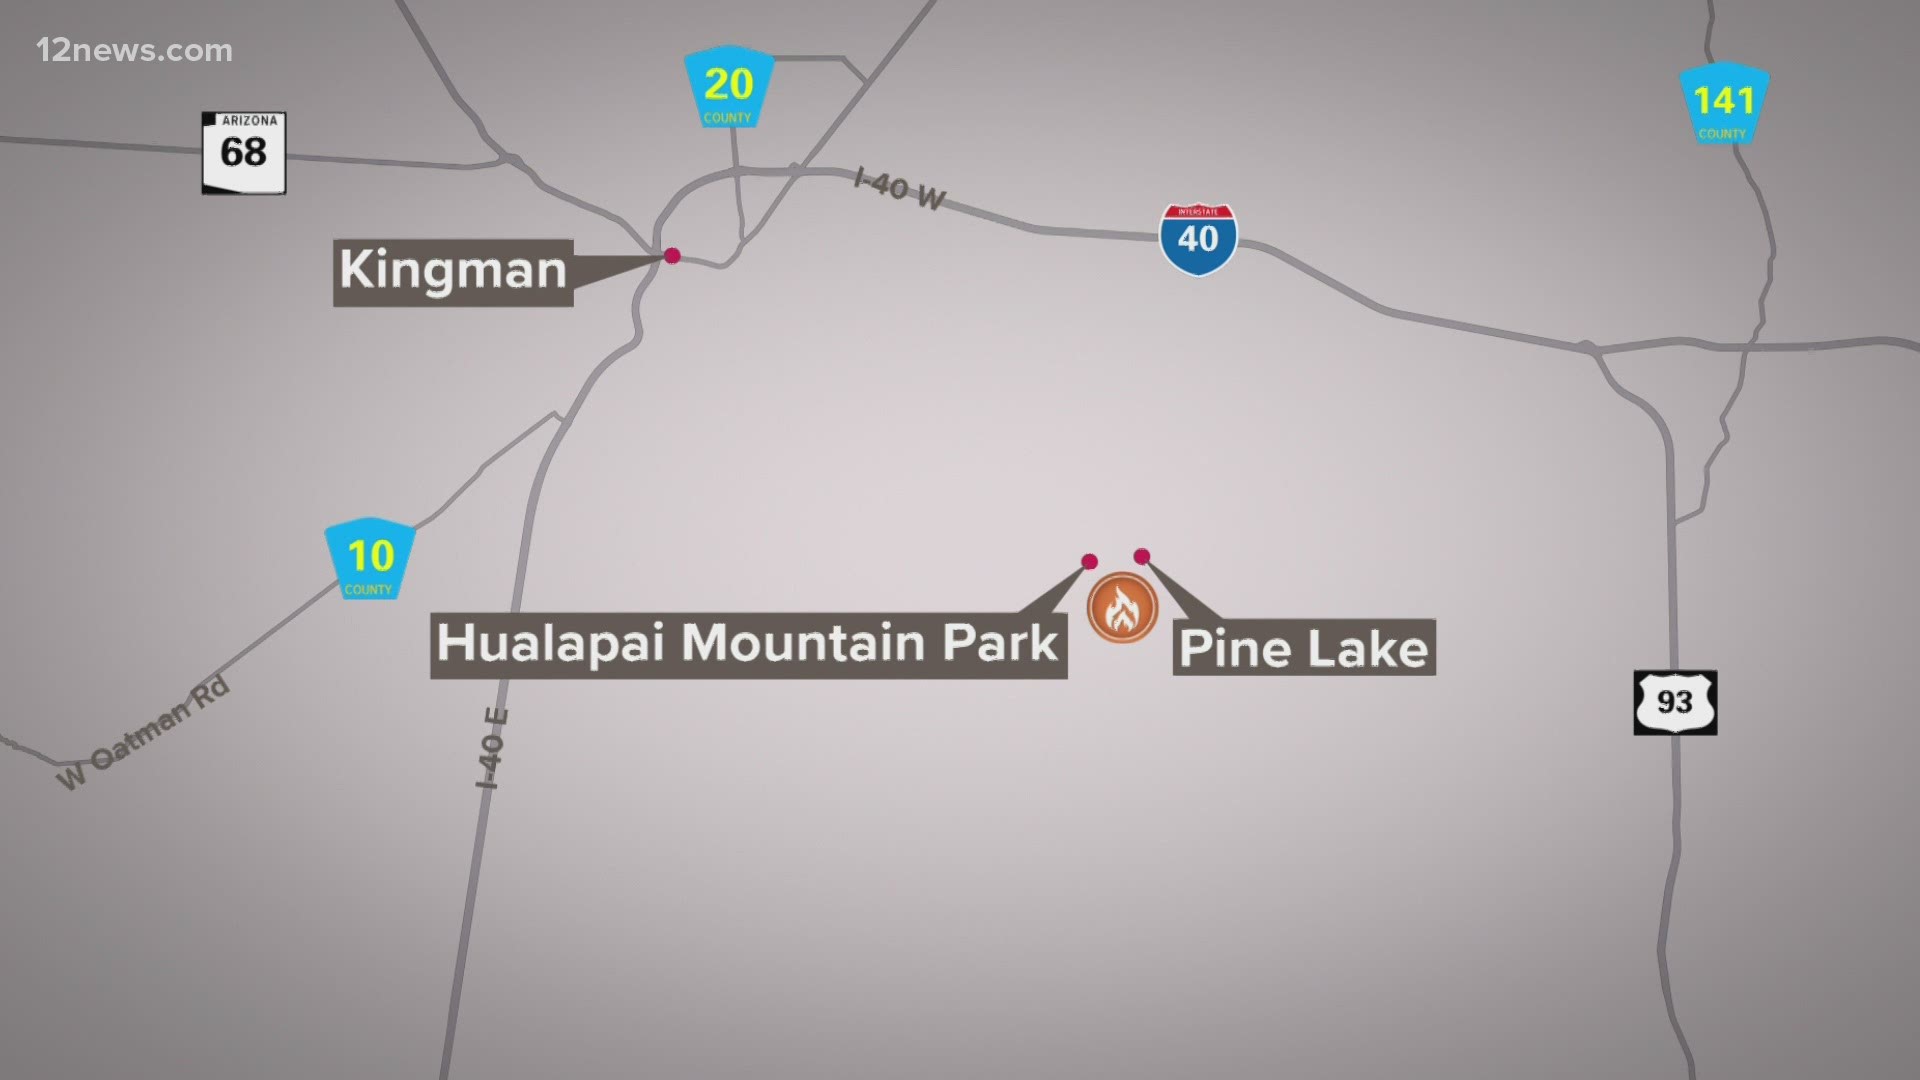 Officials say that the evacuations are in place for about 200 homes in the Pine Lake community, Hualapai Mountain Park and Hualapai Mountain Lodge.